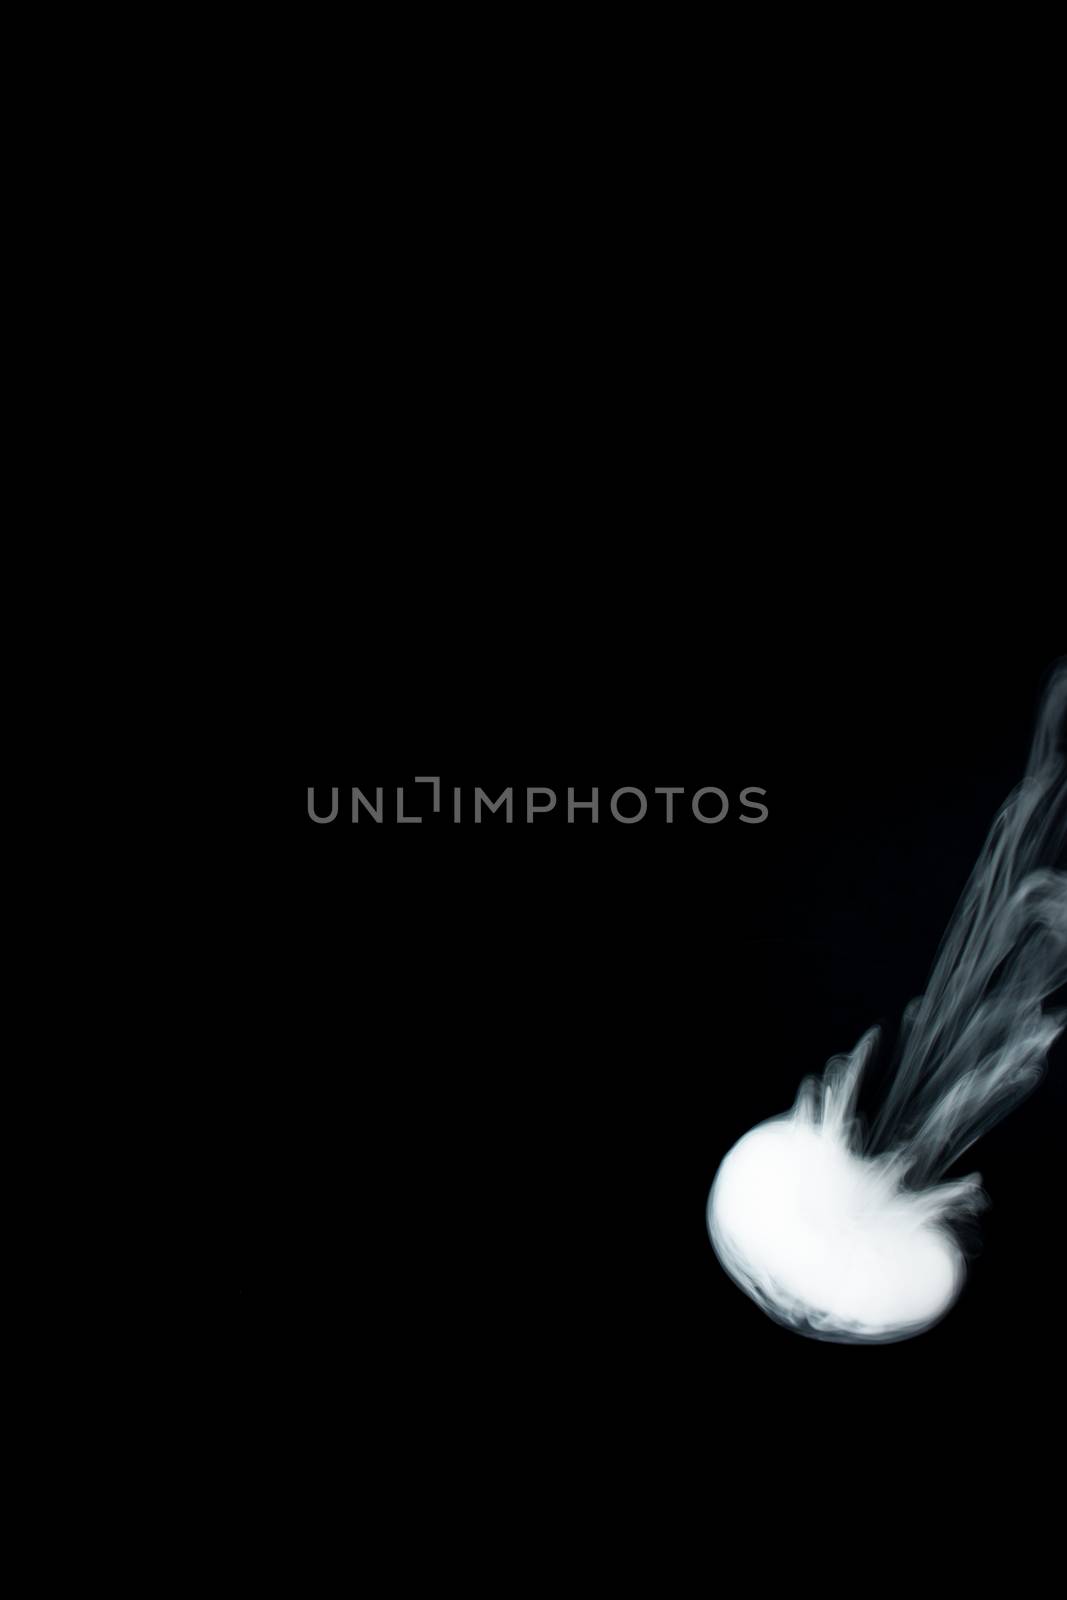 Round ring of vape fog on black background. At right side thick smoke ring goes down.. Vape culture and no smoking direction.